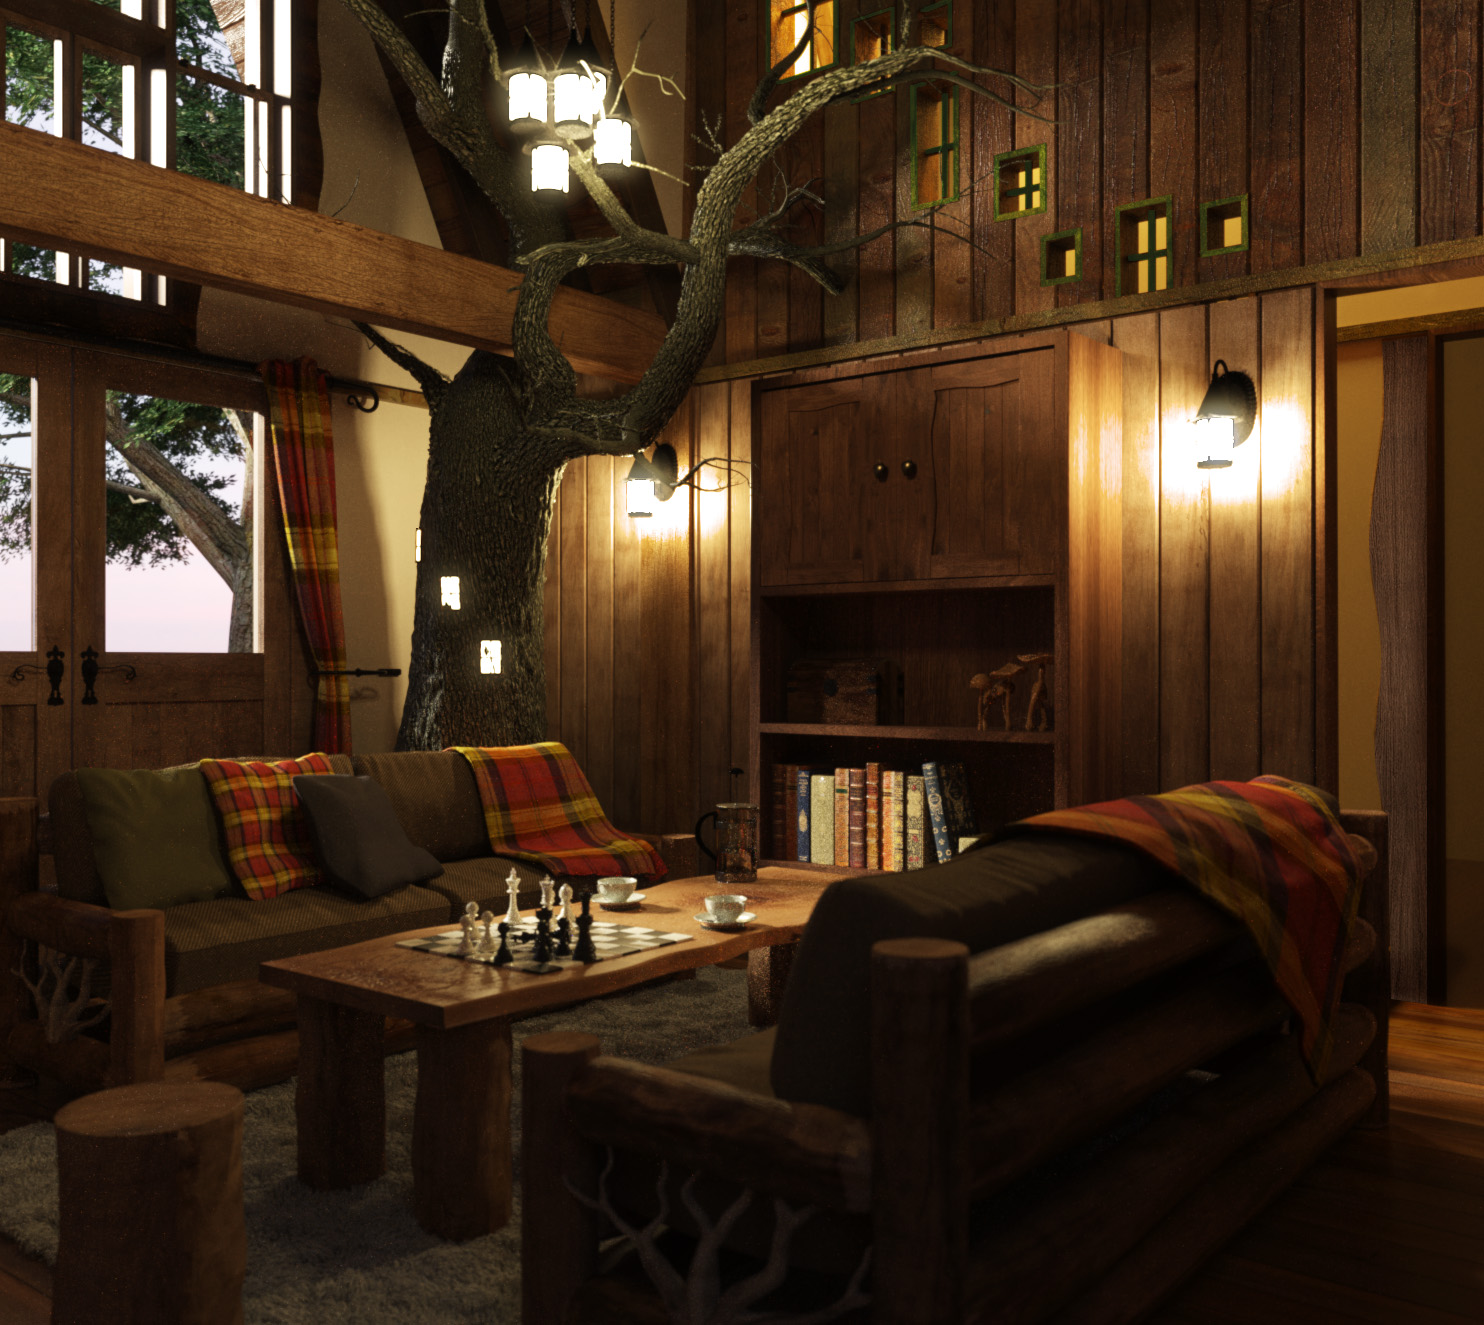 dark tree house interior, with a living tree, wooden paneling and two brown sofas, a rough wooden table and stool